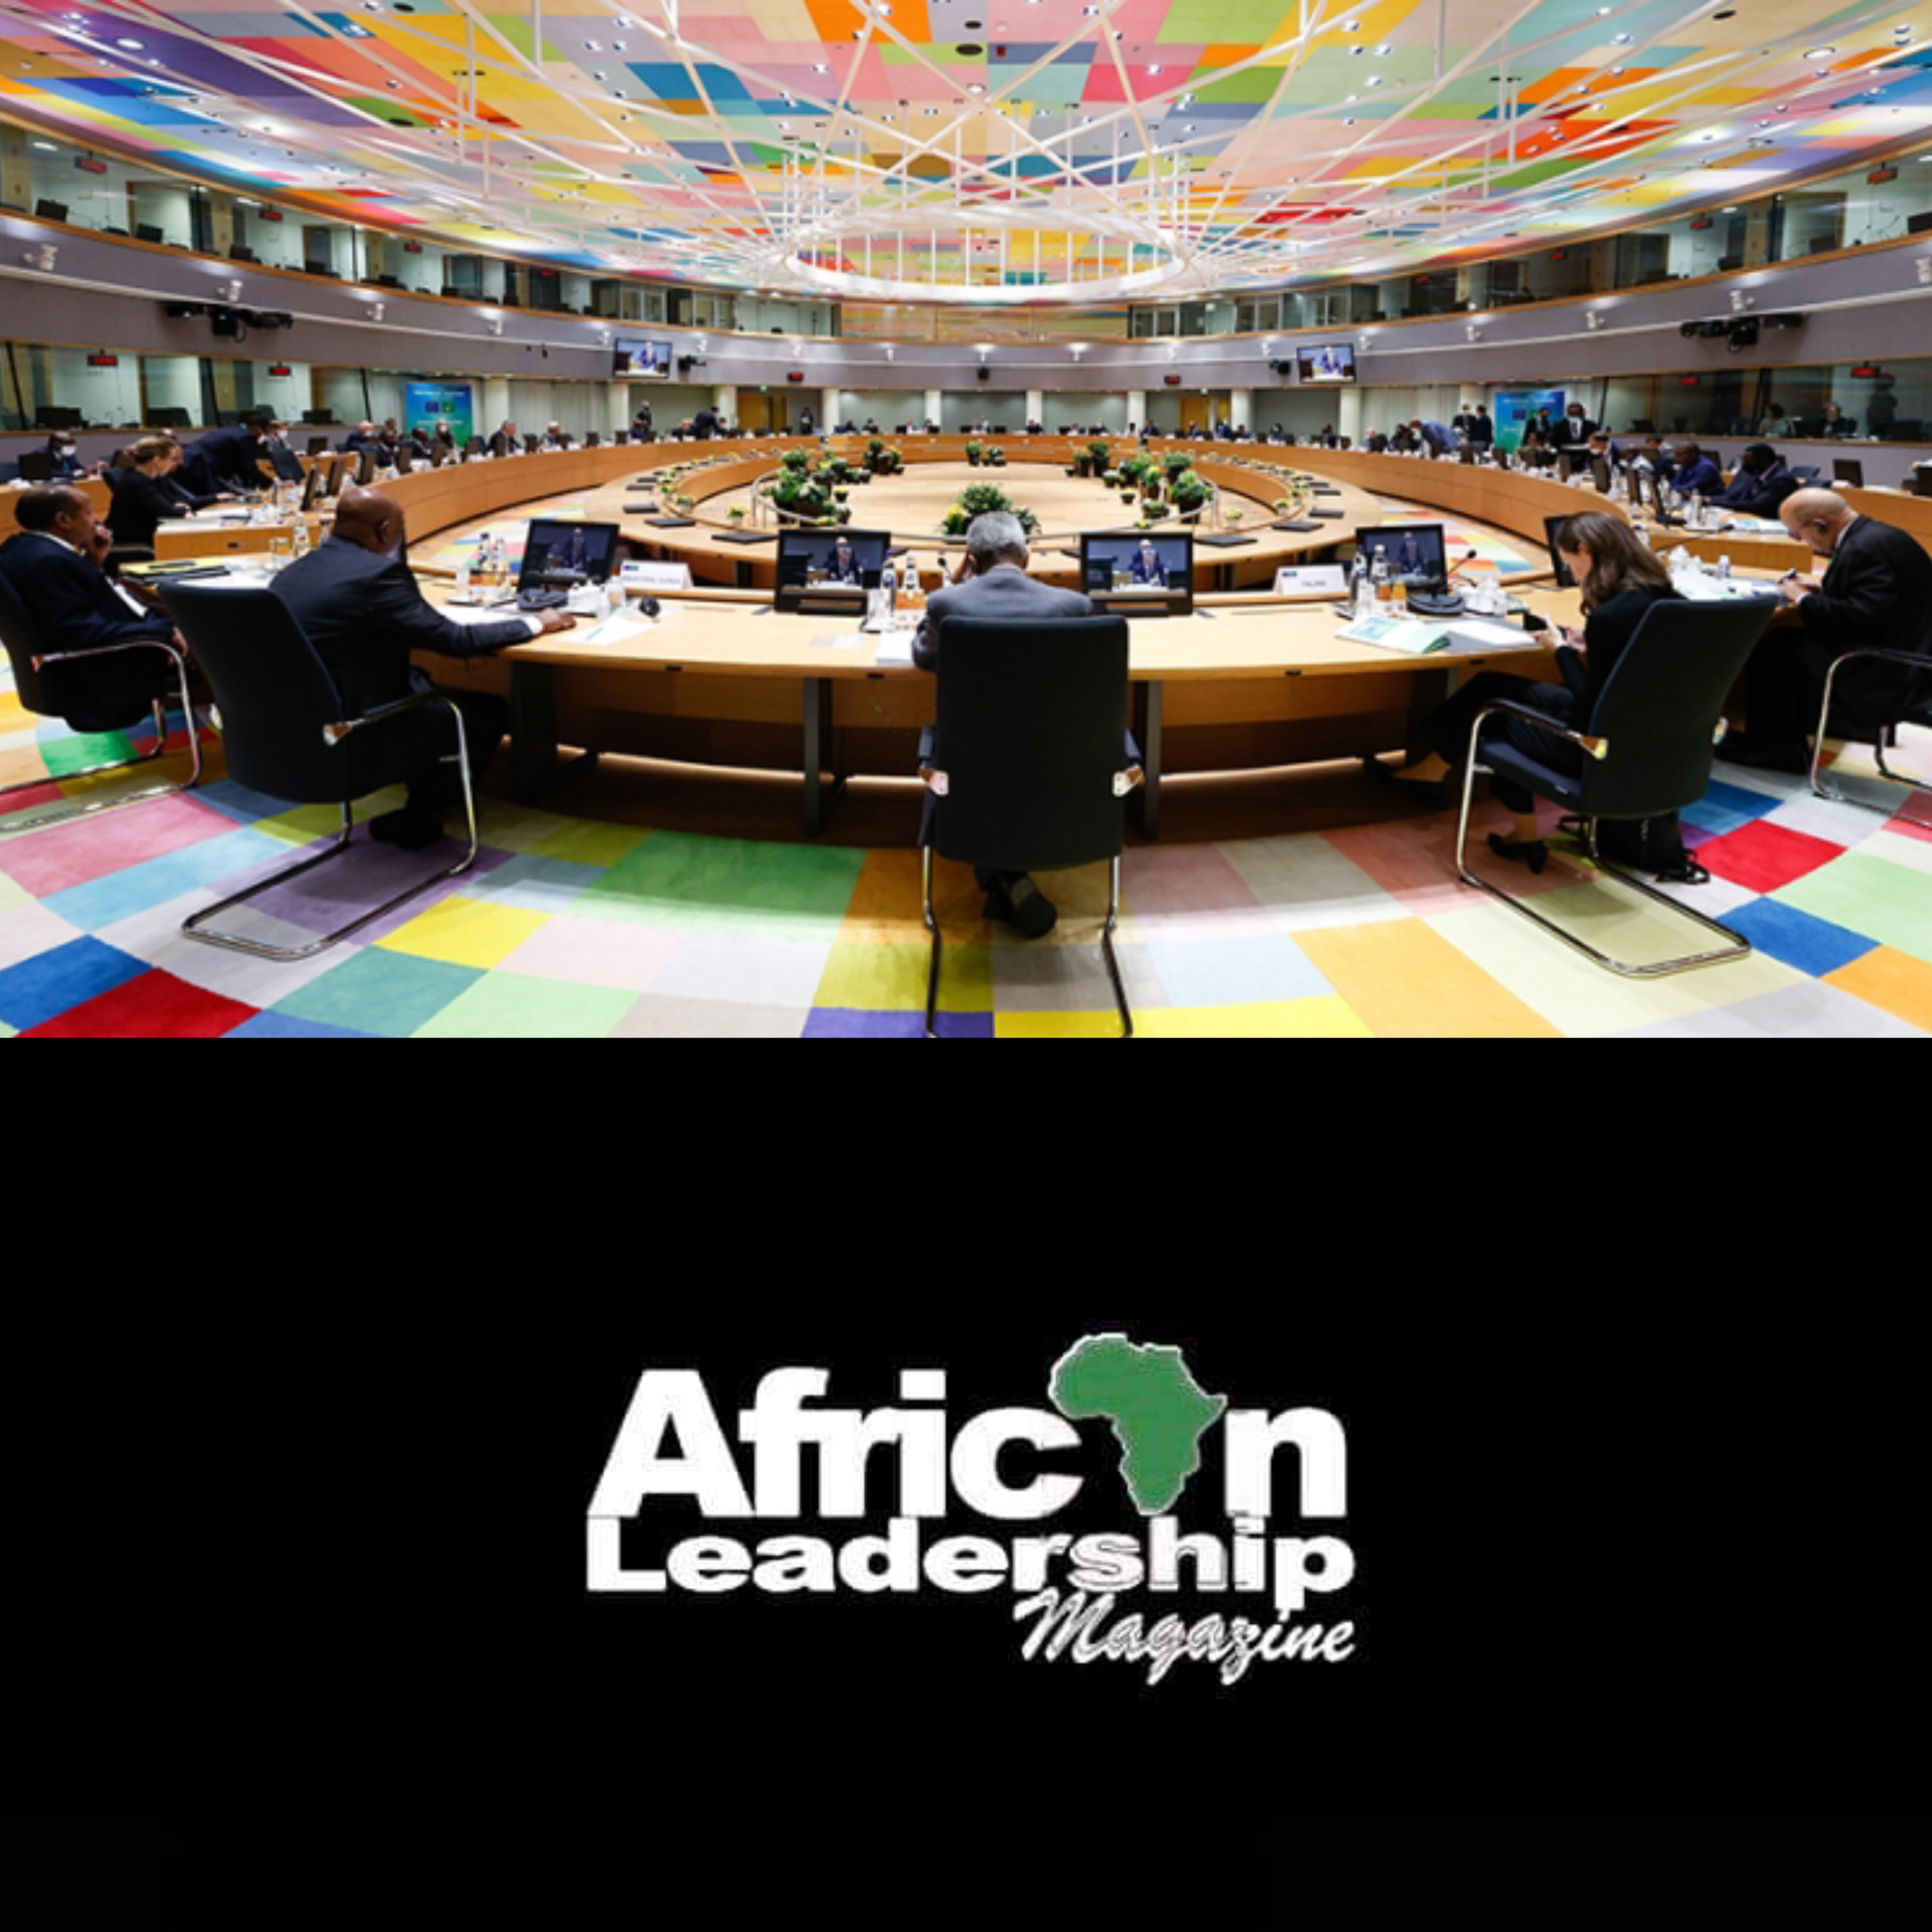 African Leadership Magazine to attend the 36th AU Summit in Addis Ababa